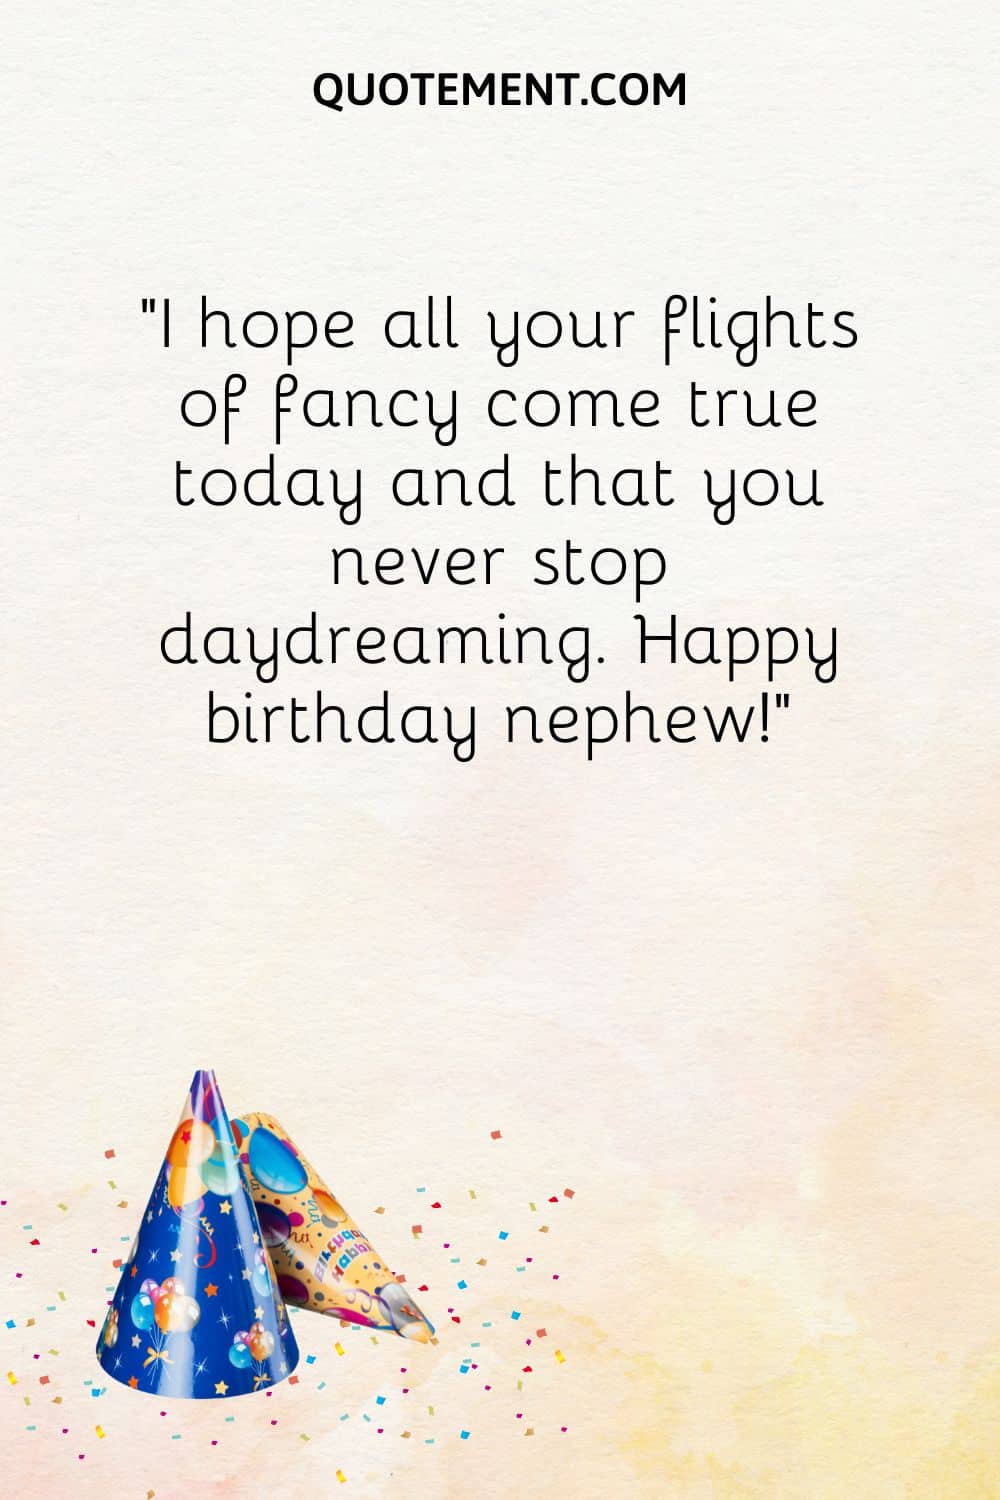 “I hope all your flights of fancy come true today and that you never stop daydreaming. Happy birthday nephew!”